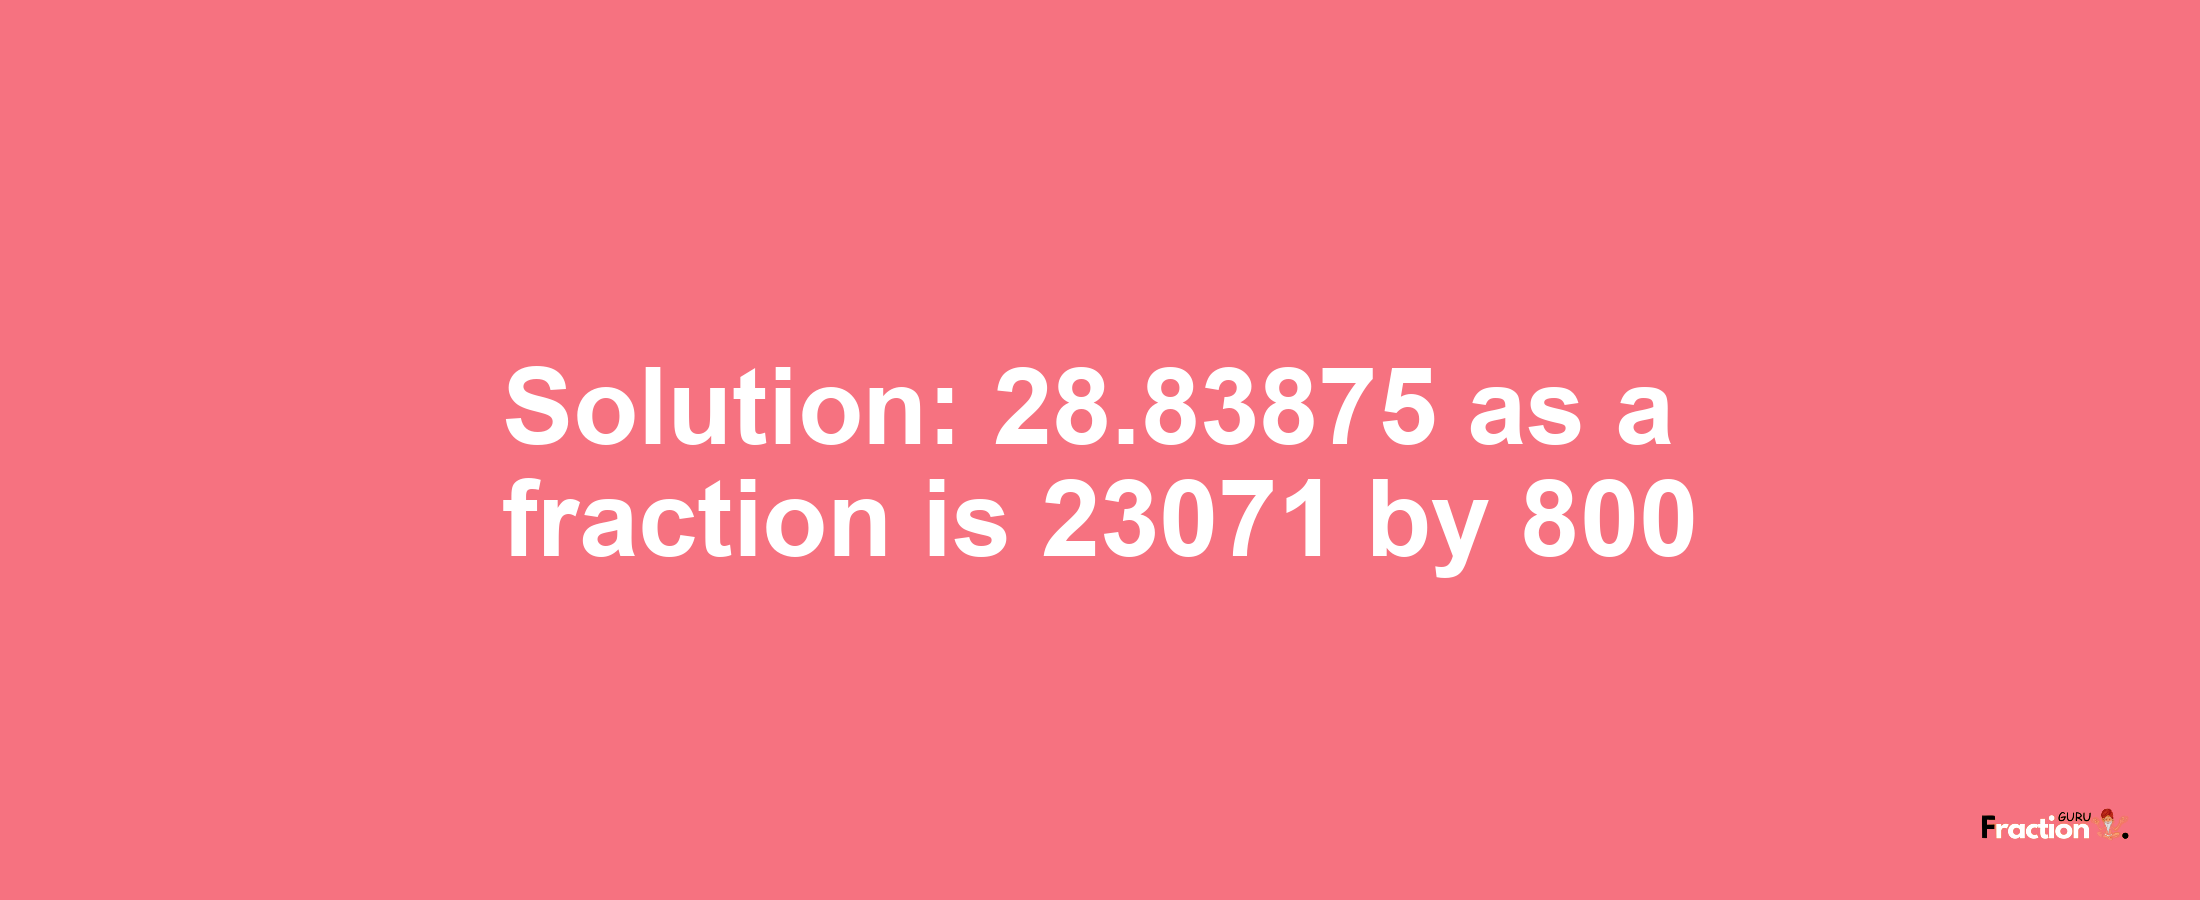 Solution:28.83875 as a fraction is 23071/800